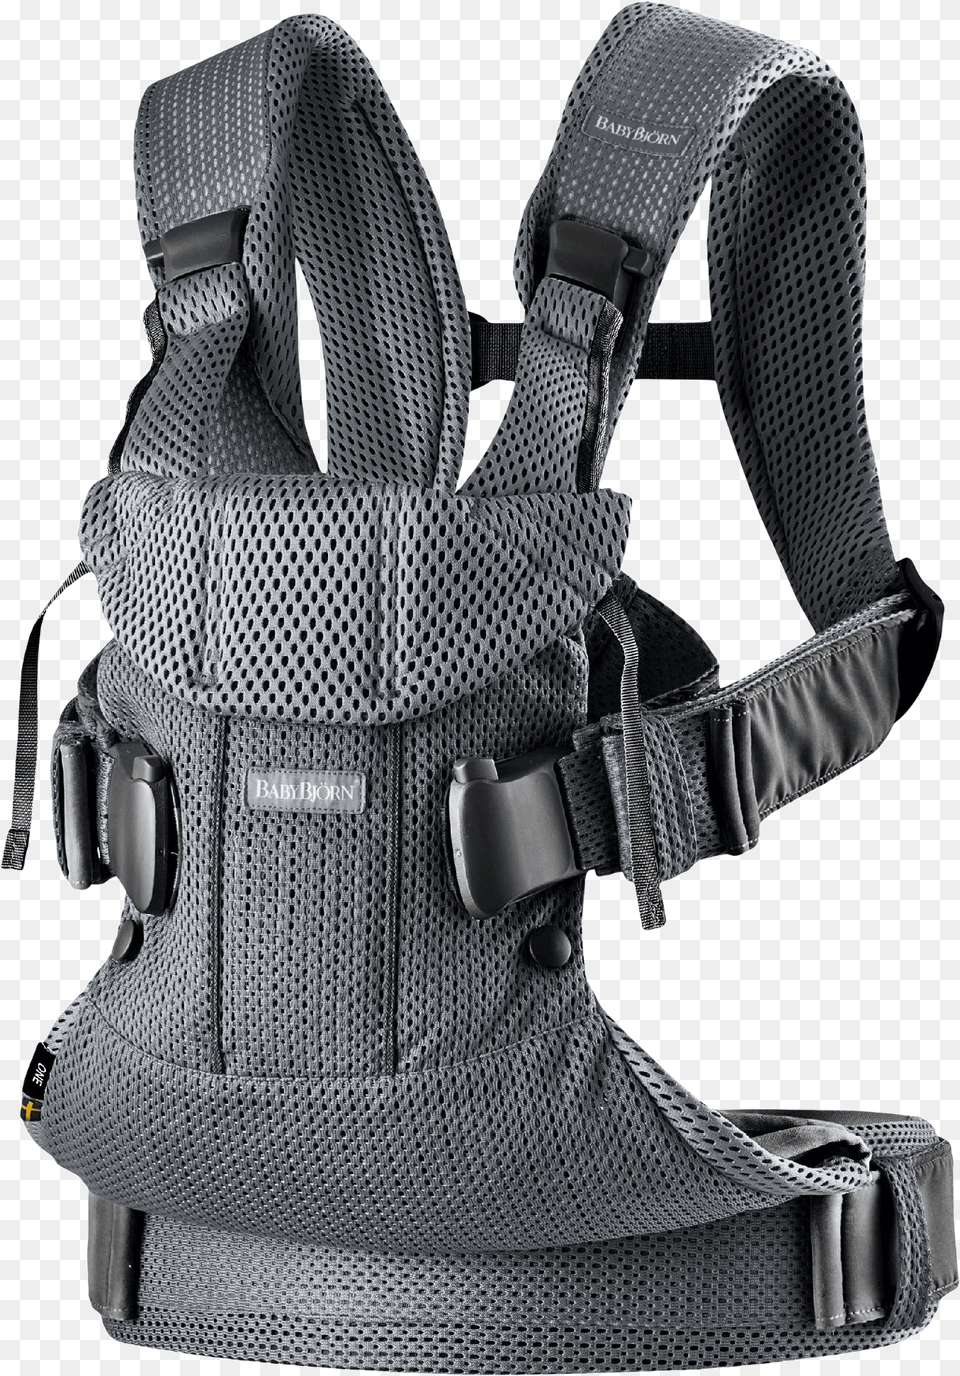 Baby Carrier One Air In Anthracite Mesh An Ergonomic Baby Bjorn One Air Anthracite, Harness, Clothing, Lifejacket, Vest Png